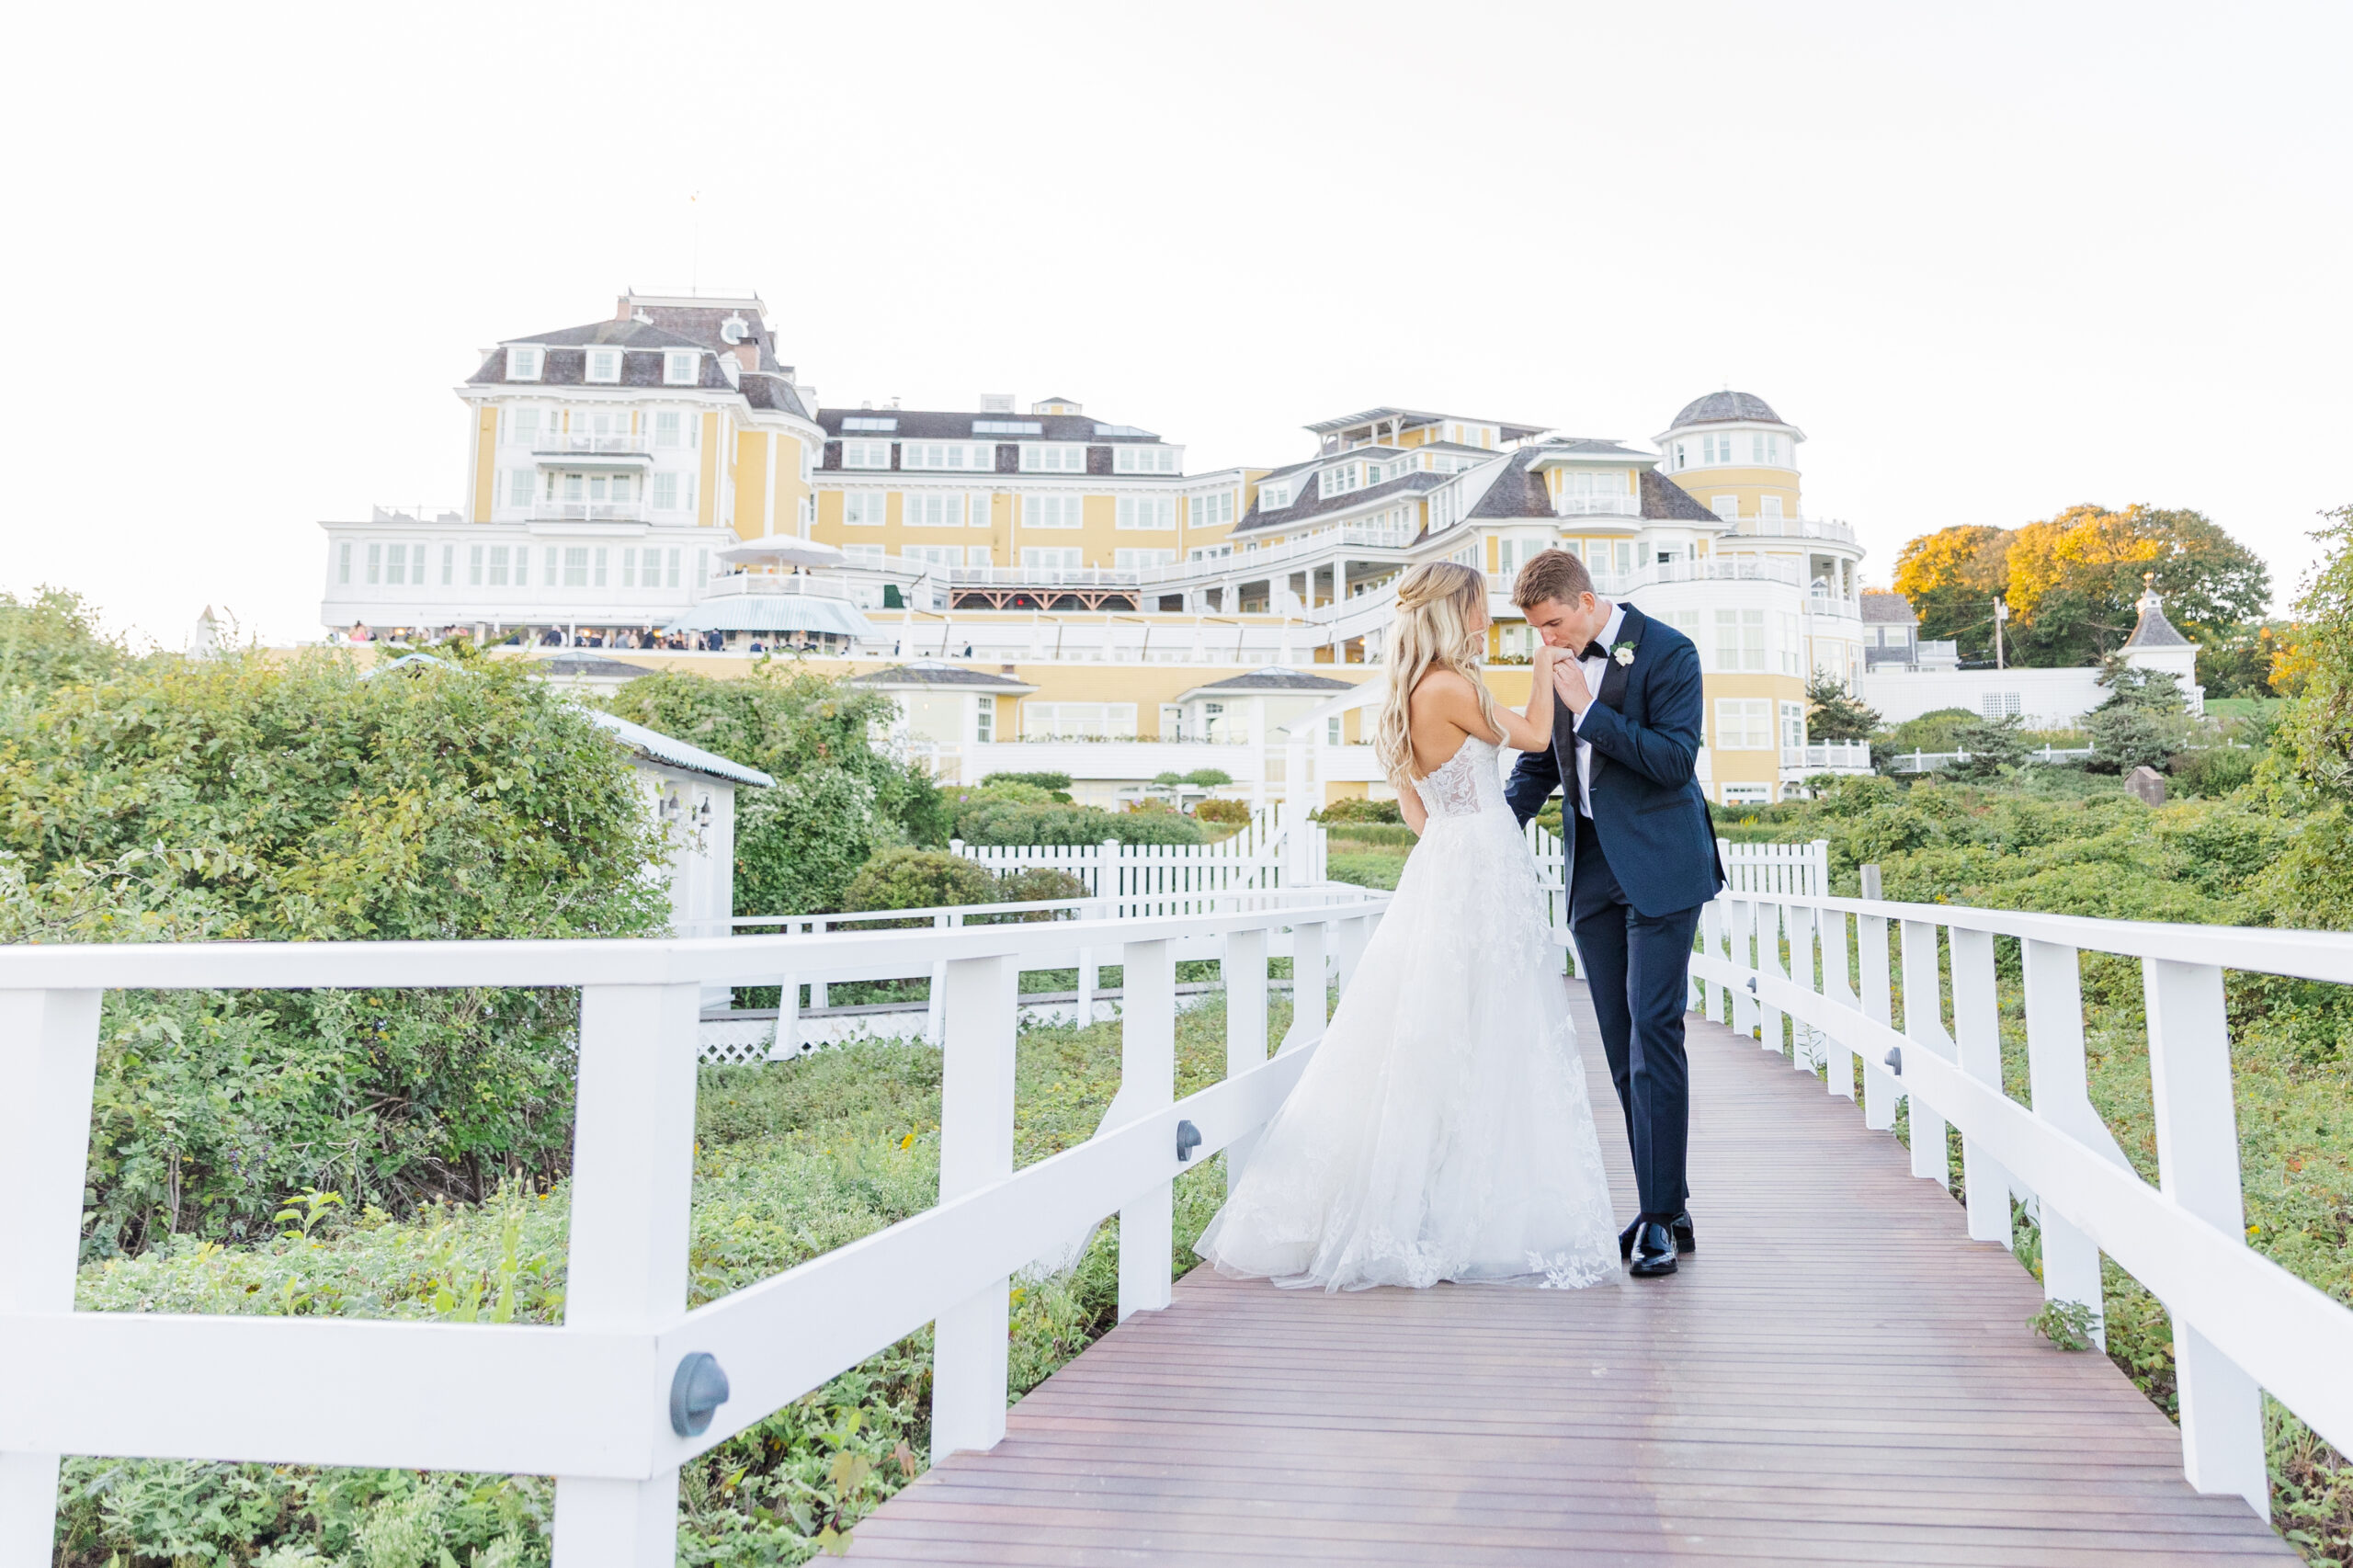 A groom kisses his brides hand on the boardwalk of Ocean House in Watch Hill Rhode Island.